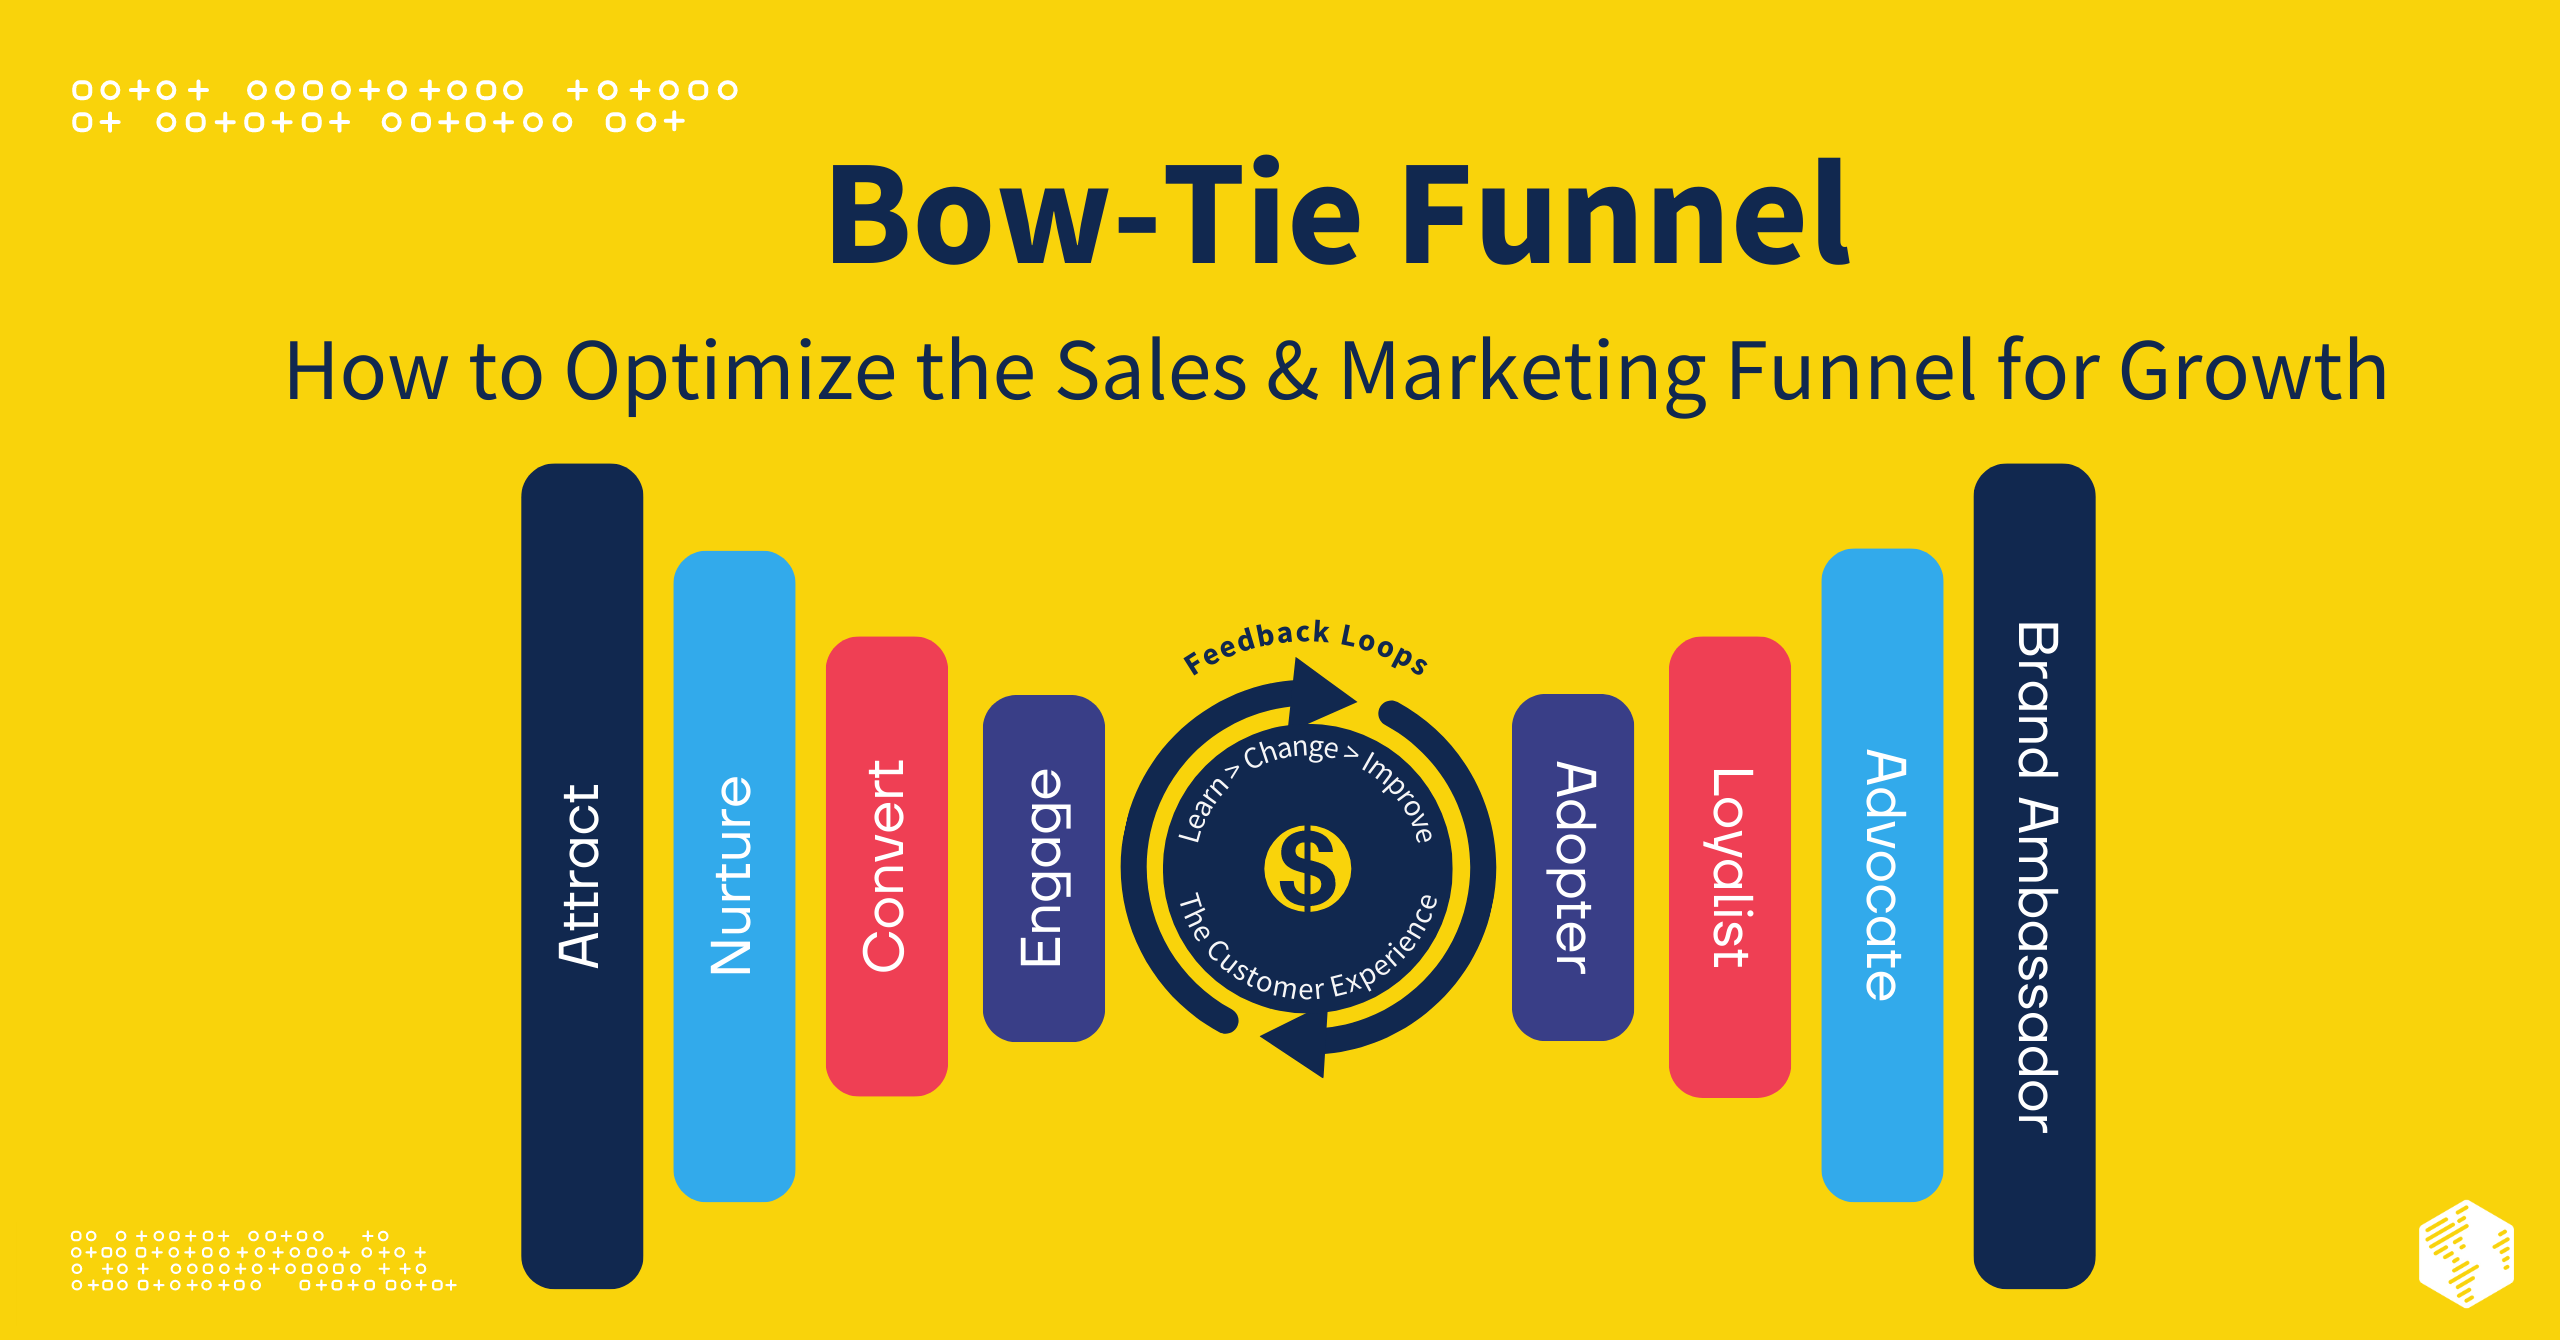 The Bow Tie Funnel: How to Optimize the Sales & Marketing Funnel for Growth